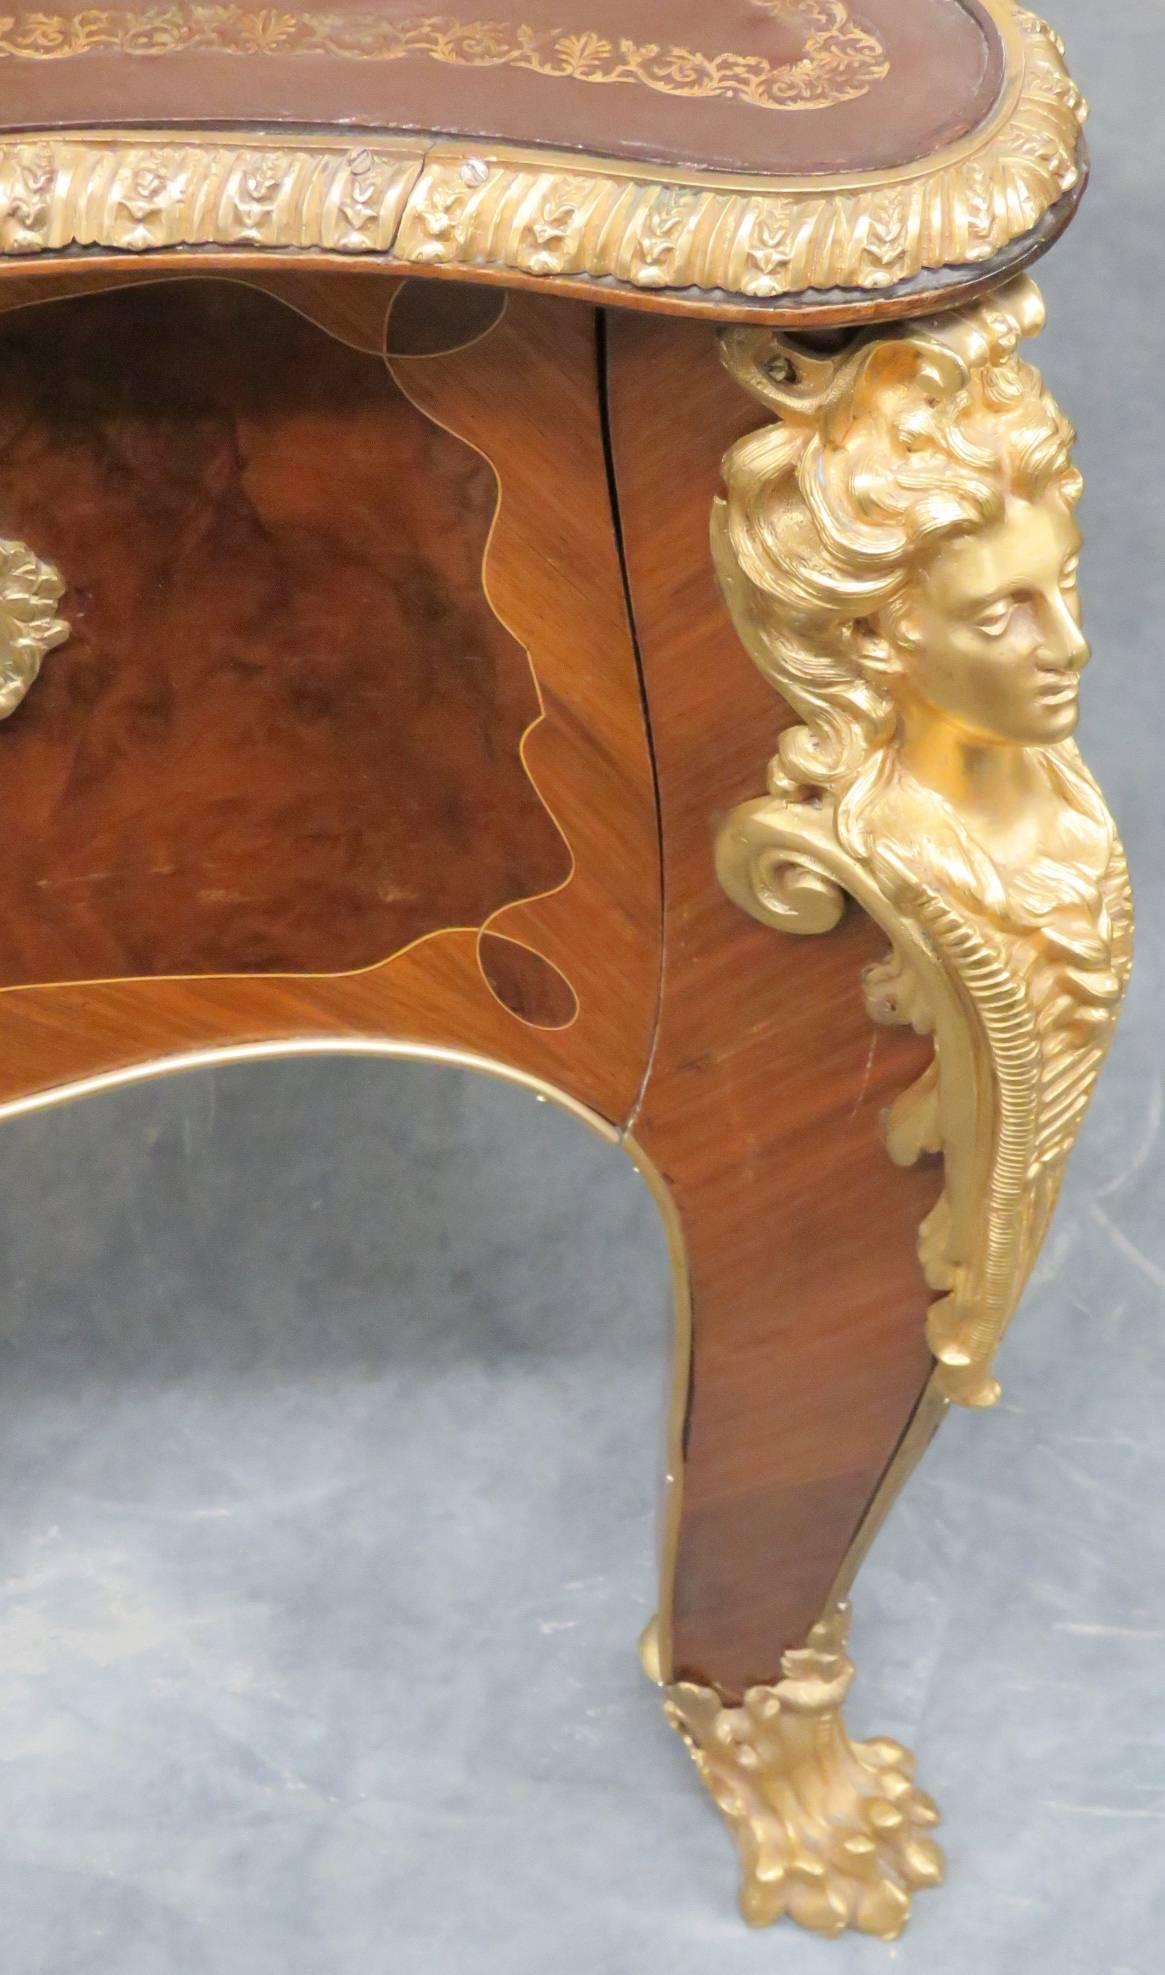 Figural mounts, claw feet and hardware. Brown leather top. Parquetry inlaid frame.